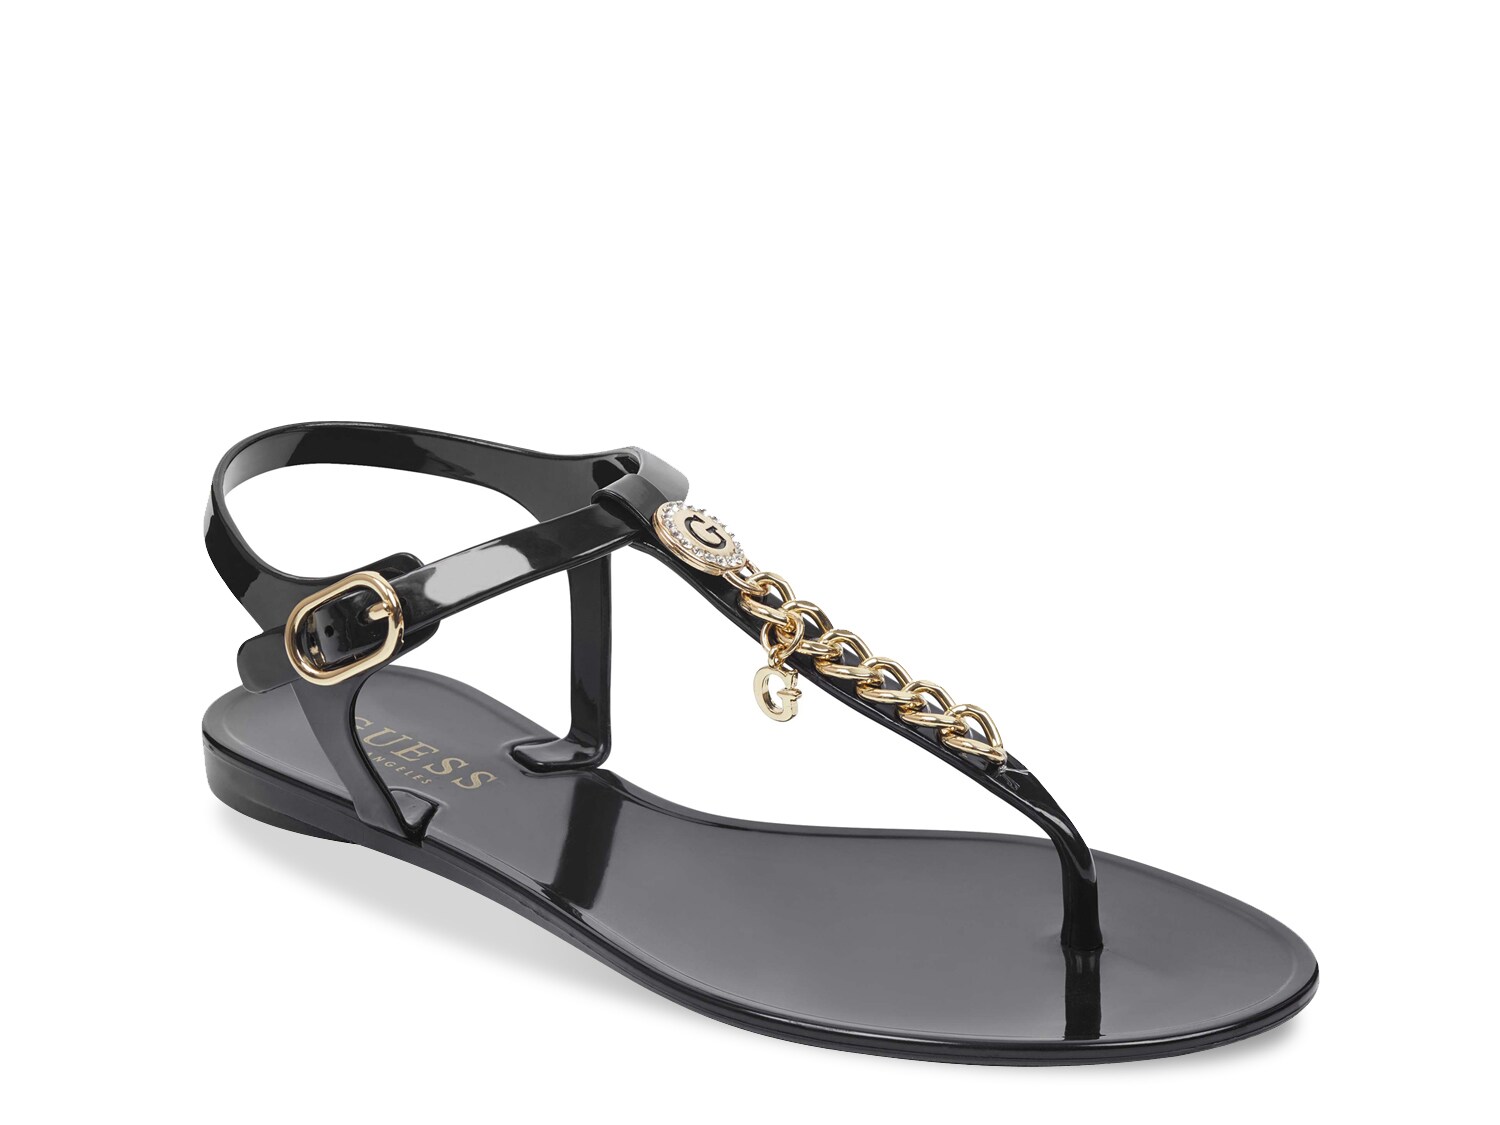 Guess Appear Sandal - Free Shipping | DSW